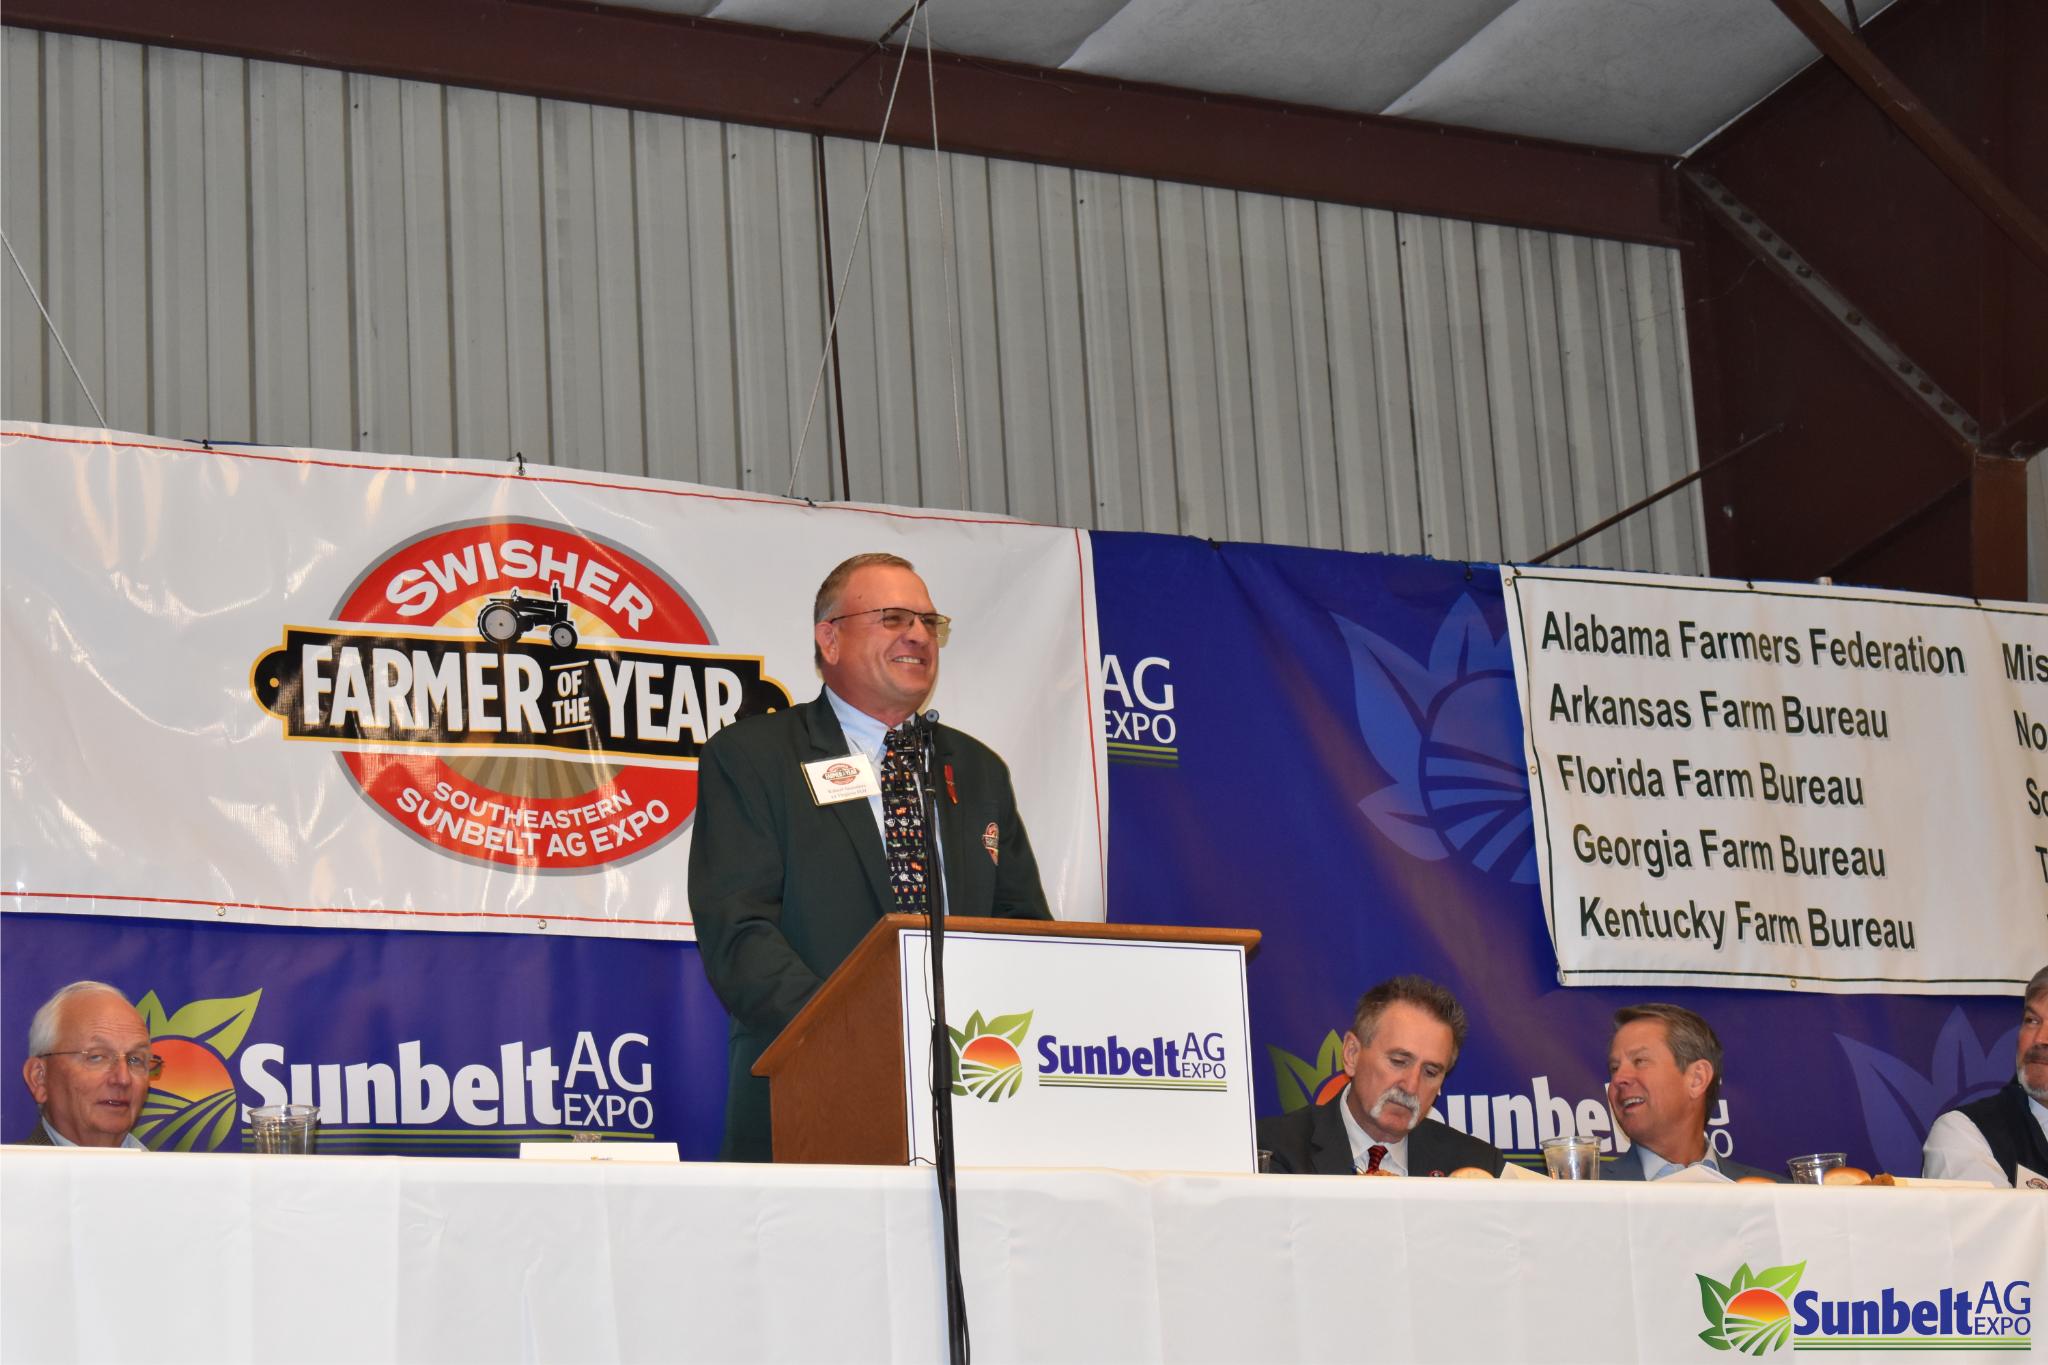 Sunbelt Ag Expo Preview Photo 2022 Farmer of the Year